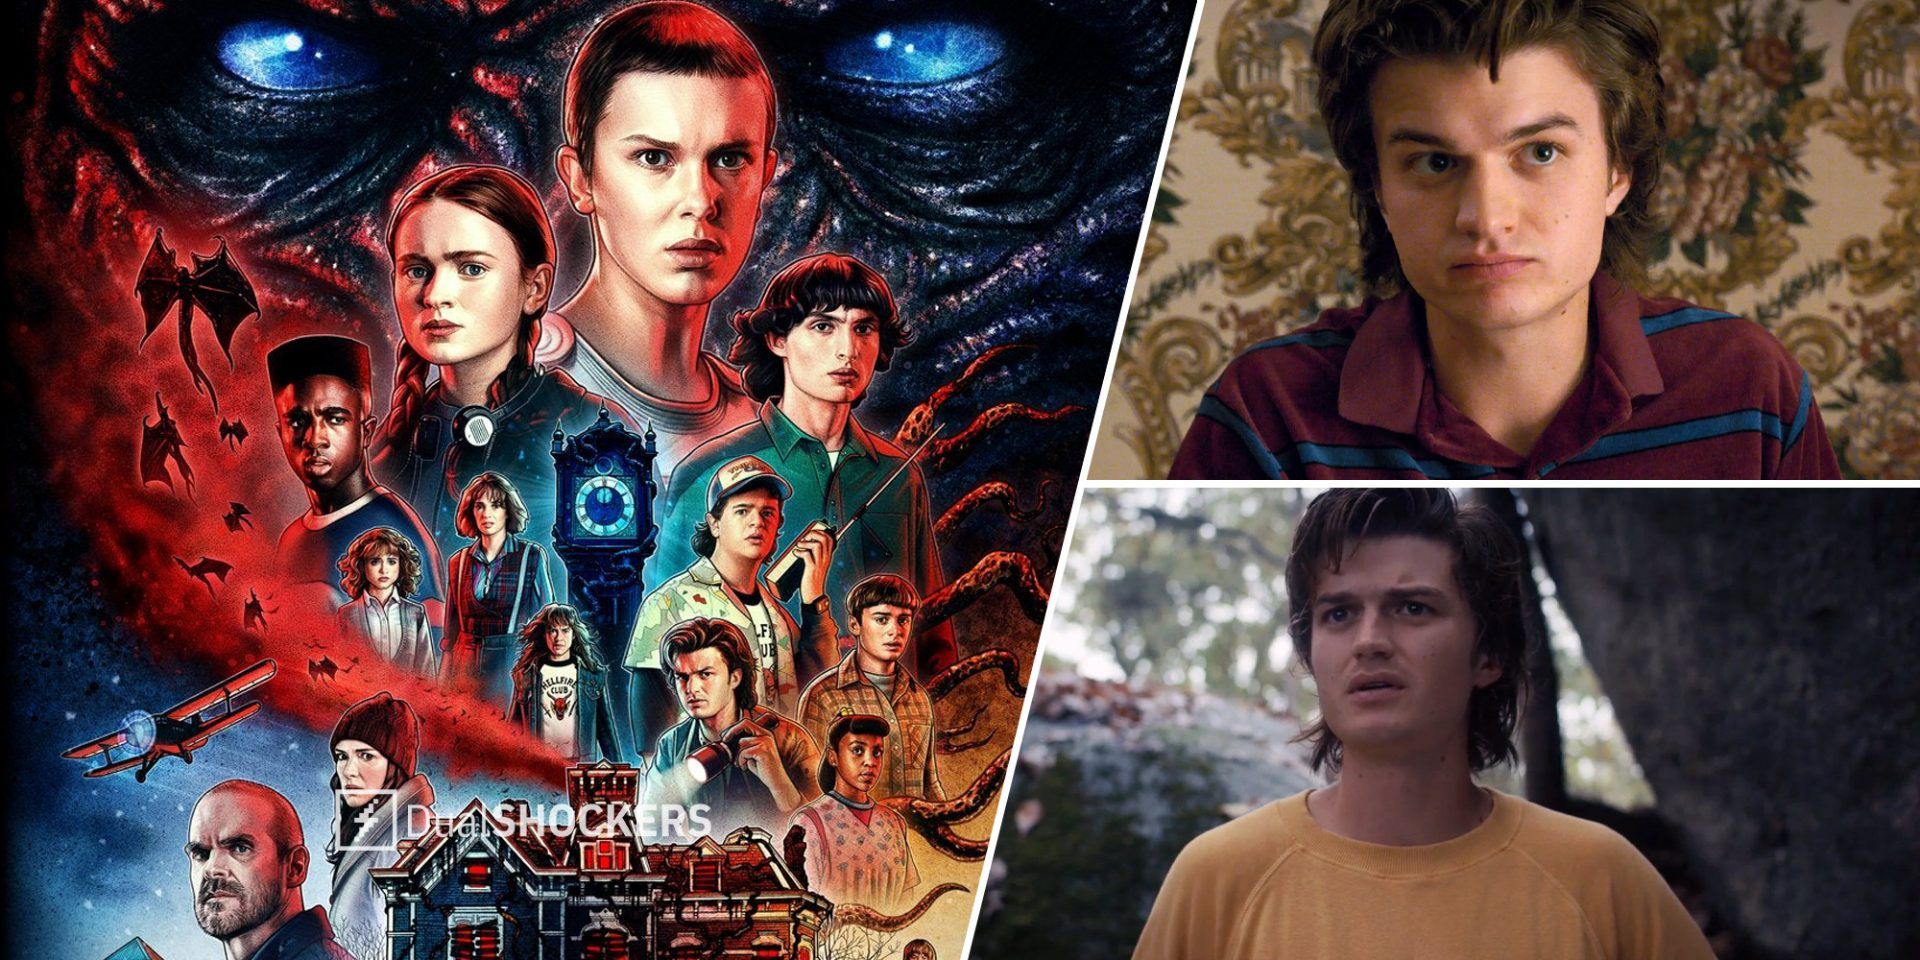 Stranger Things season 4 cast promo photo on left, Steve in season 4 on top right, Steve in season 4 looking concerned on bottom right